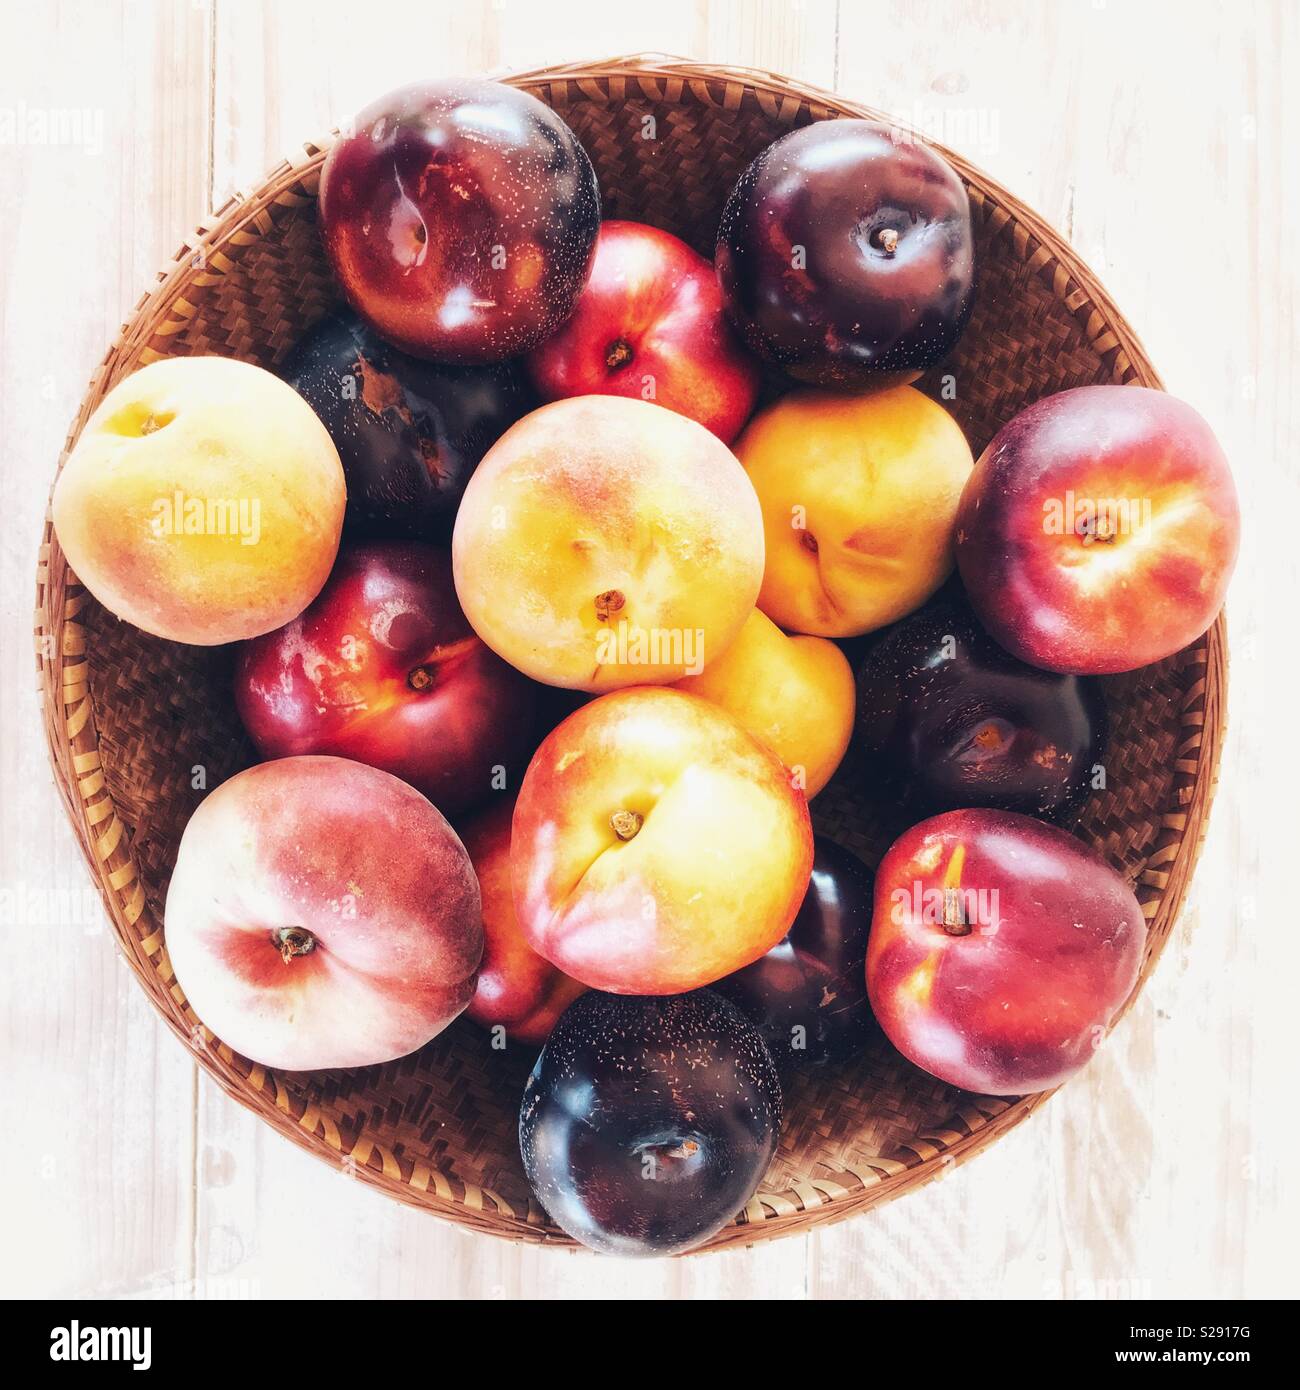 Basket of plums, peaches and nectarines Stock Photo